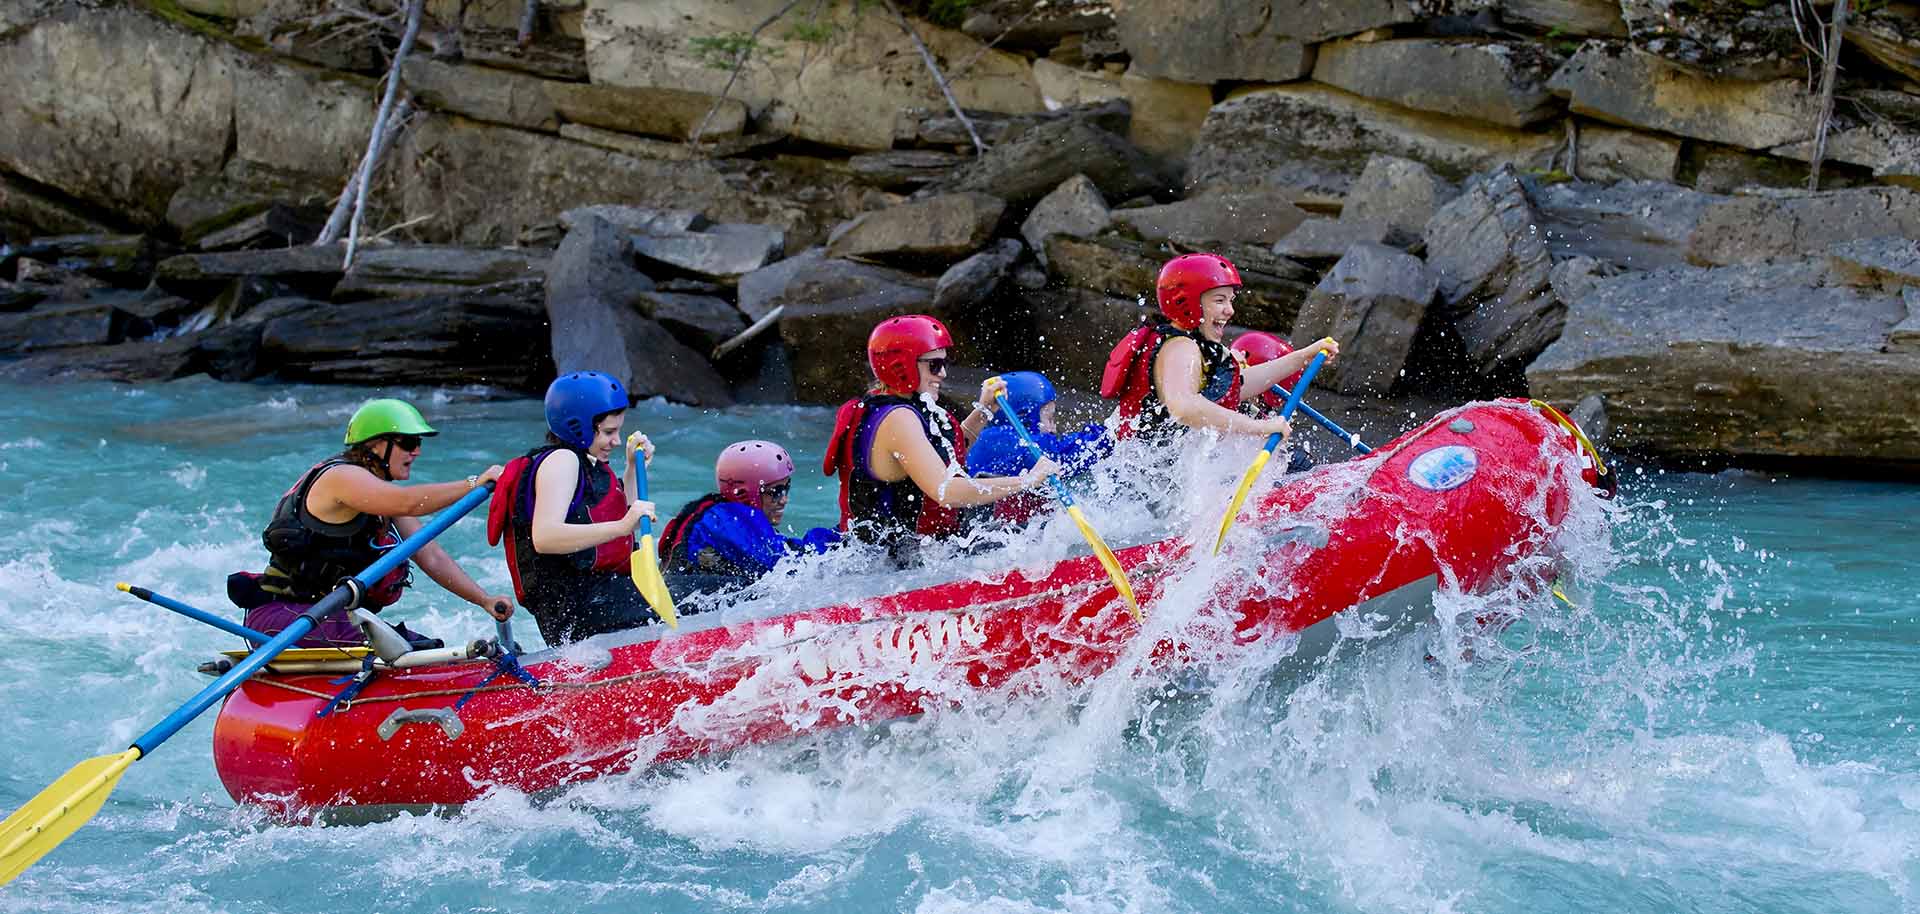 rafting activity in the region